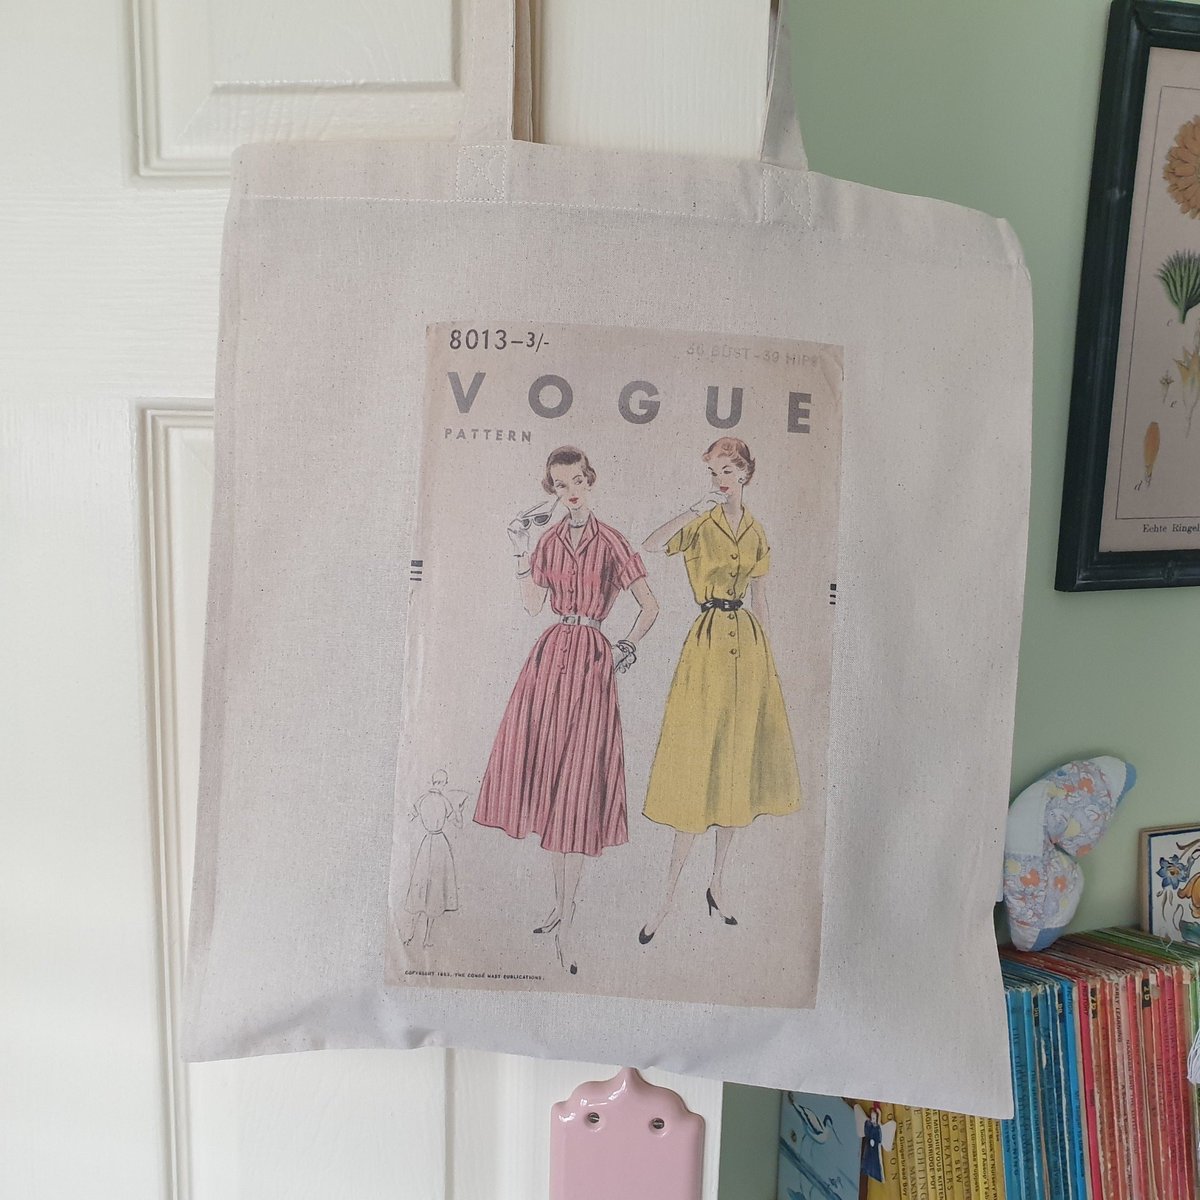 This vintage Vogue sewing pattern cover cotton tote is one of my best sellers. Perfect as a gift for anyone who loves sewing #earlybiz #sewinggift #craftbizparty sarahbenning.etsy.com/listing/813188…